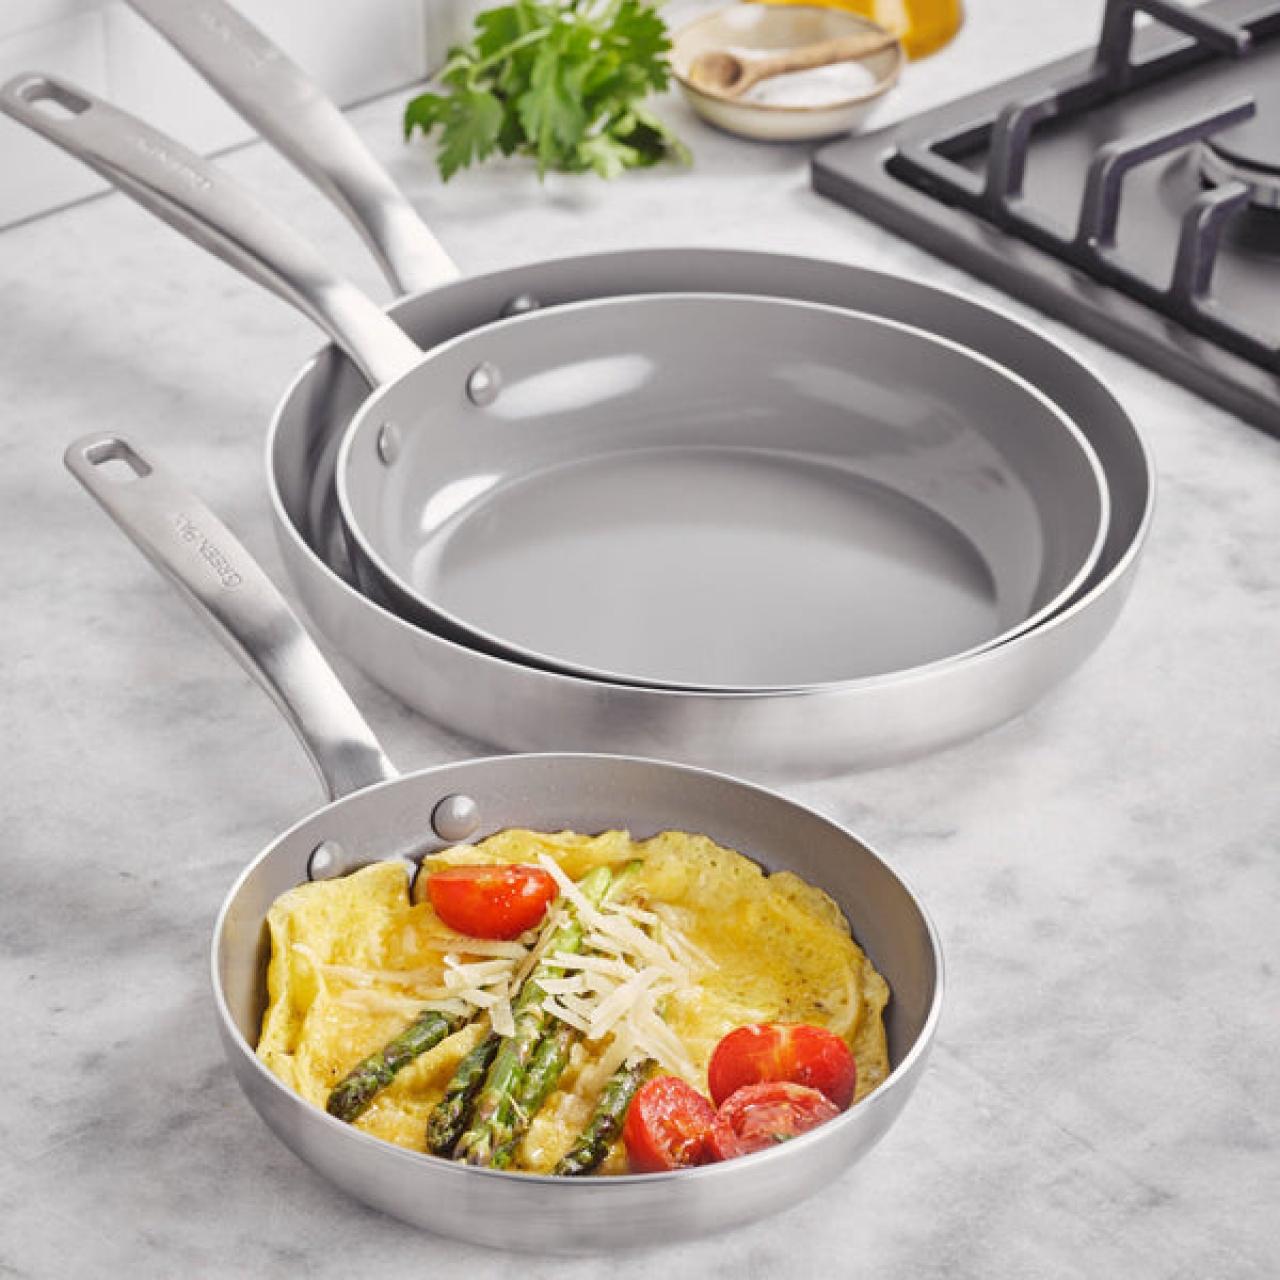 https://food.fnr.sndimg.com/content/dam/images/food/products/2023/11/20/rx_chatham-stainless-8-inch-10-inch-and-12-inch-frypan-set.jpeg.rend.hgtvcom.1280.1280.suffix/1700509097433.jpeg